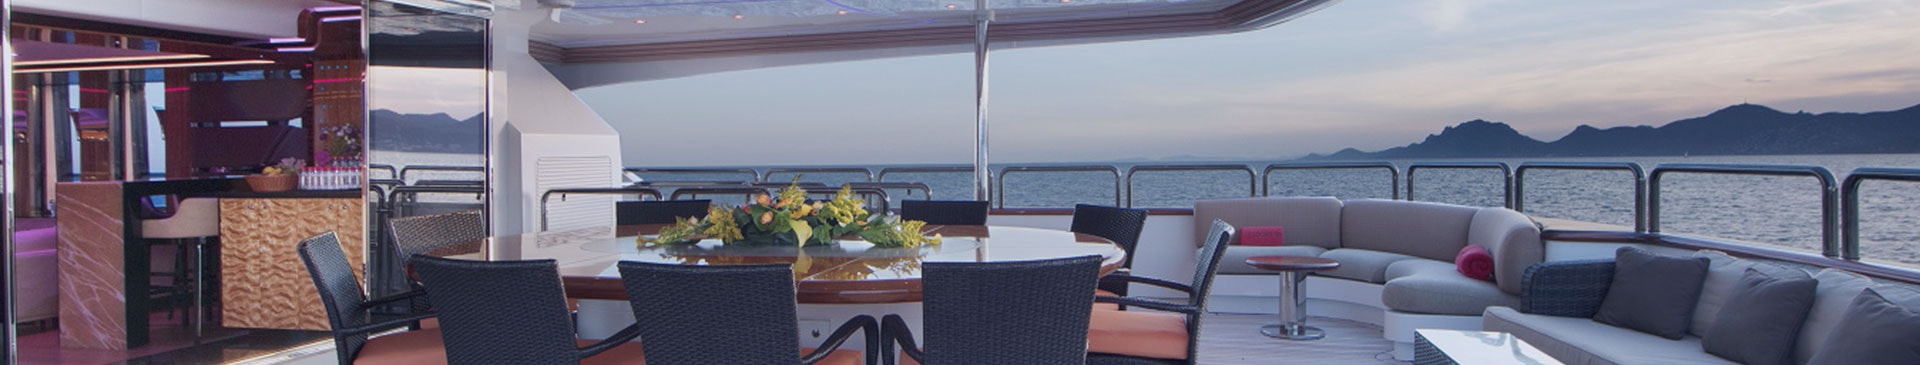 How to Arrange an Engagement Party at Sea?